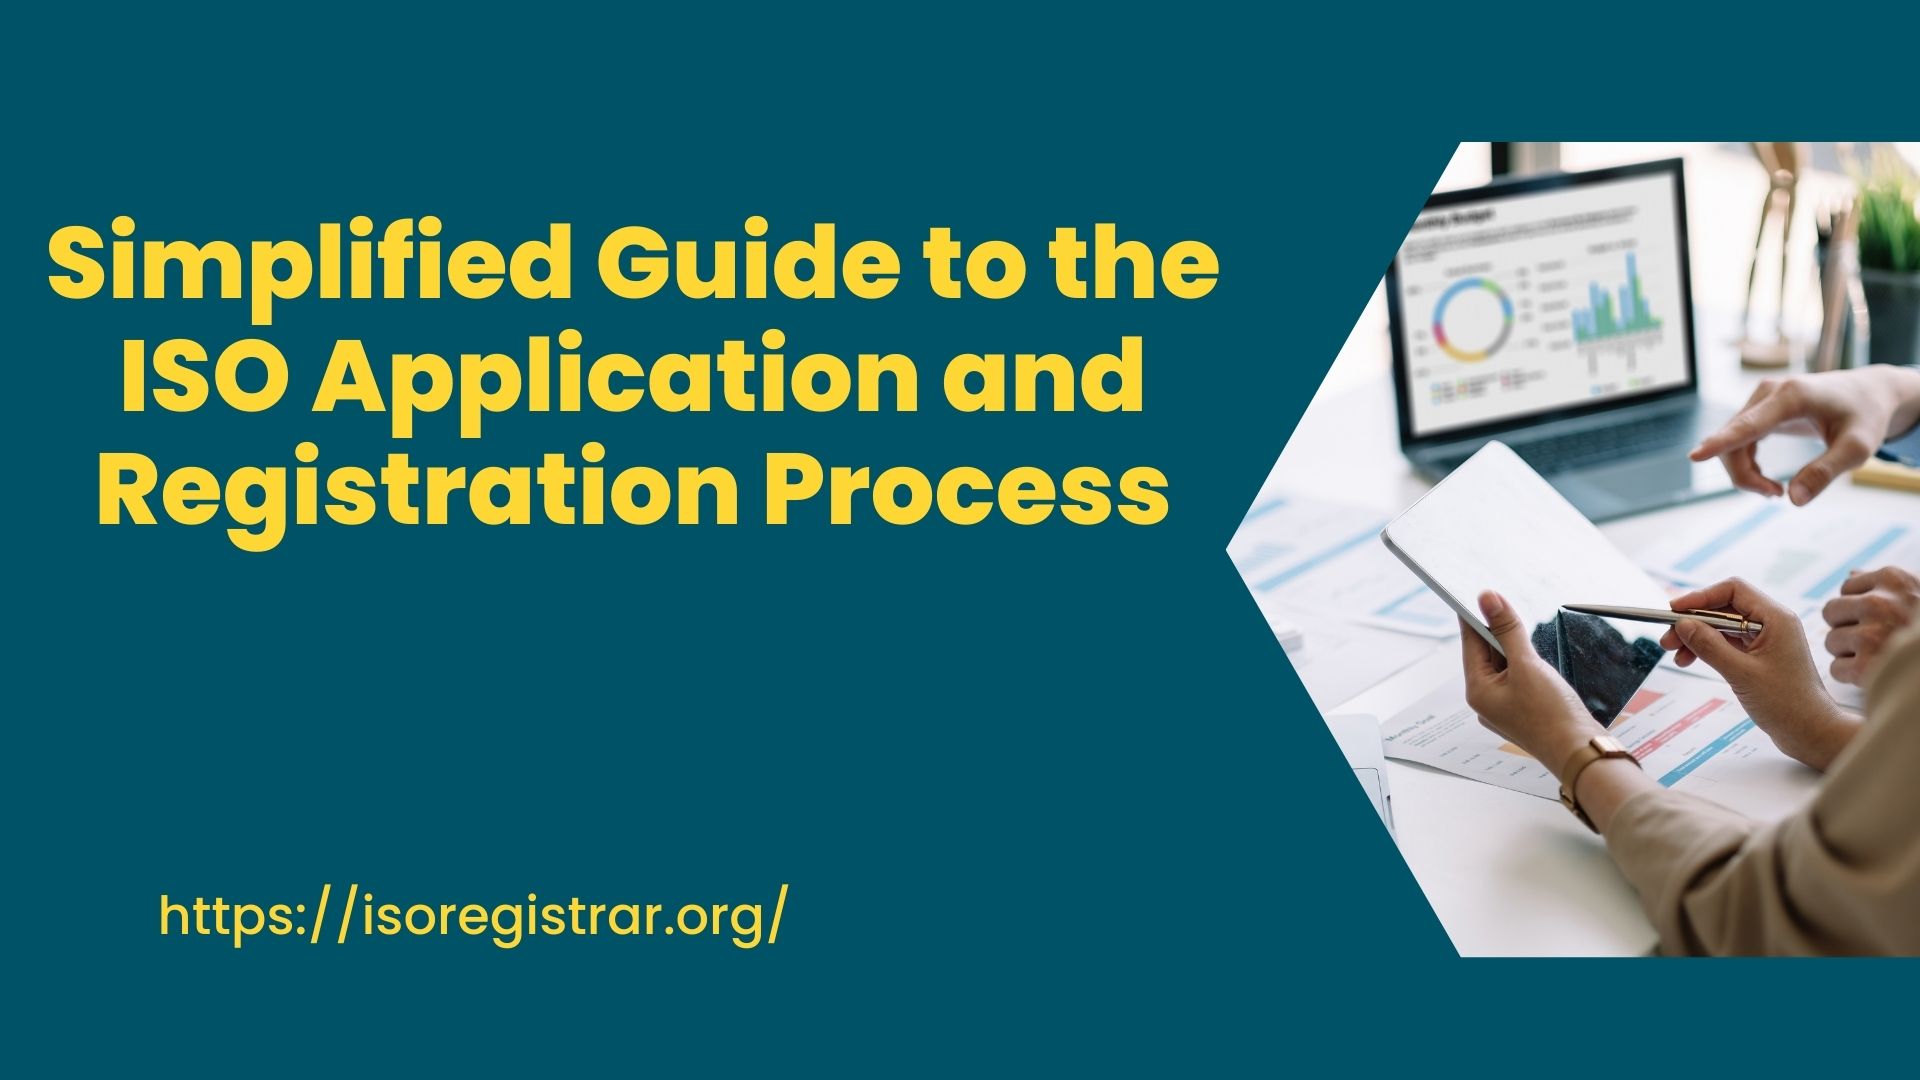 Simplified Guide to the ISO Application and Registration Process